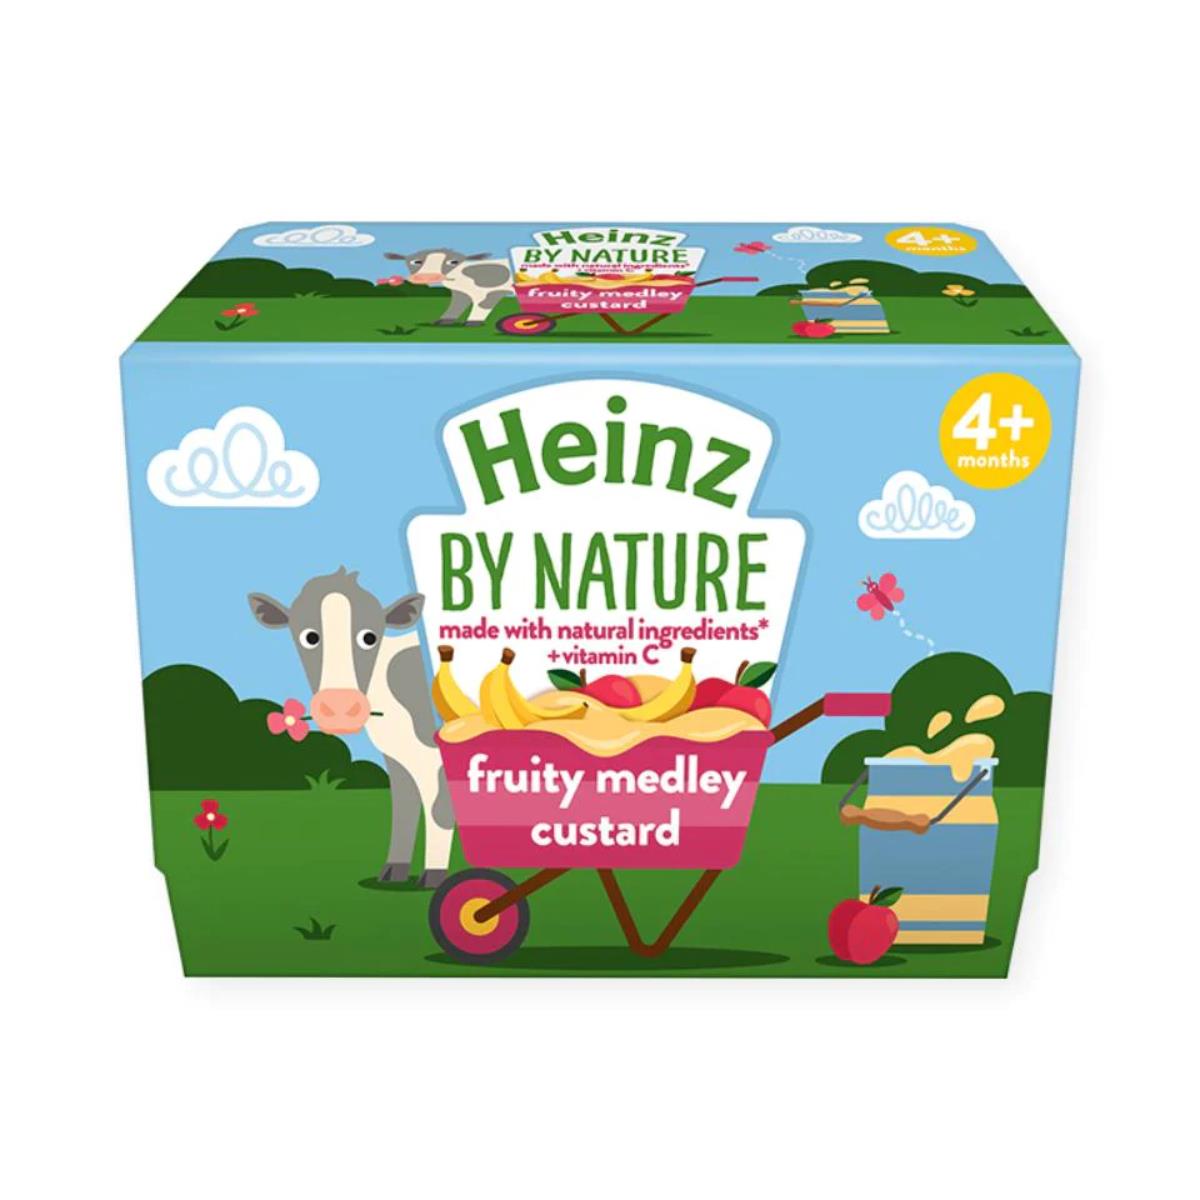 Heinz by Nature Fruity Medley Custrad (Pack of 4) - 400g (4x100g)